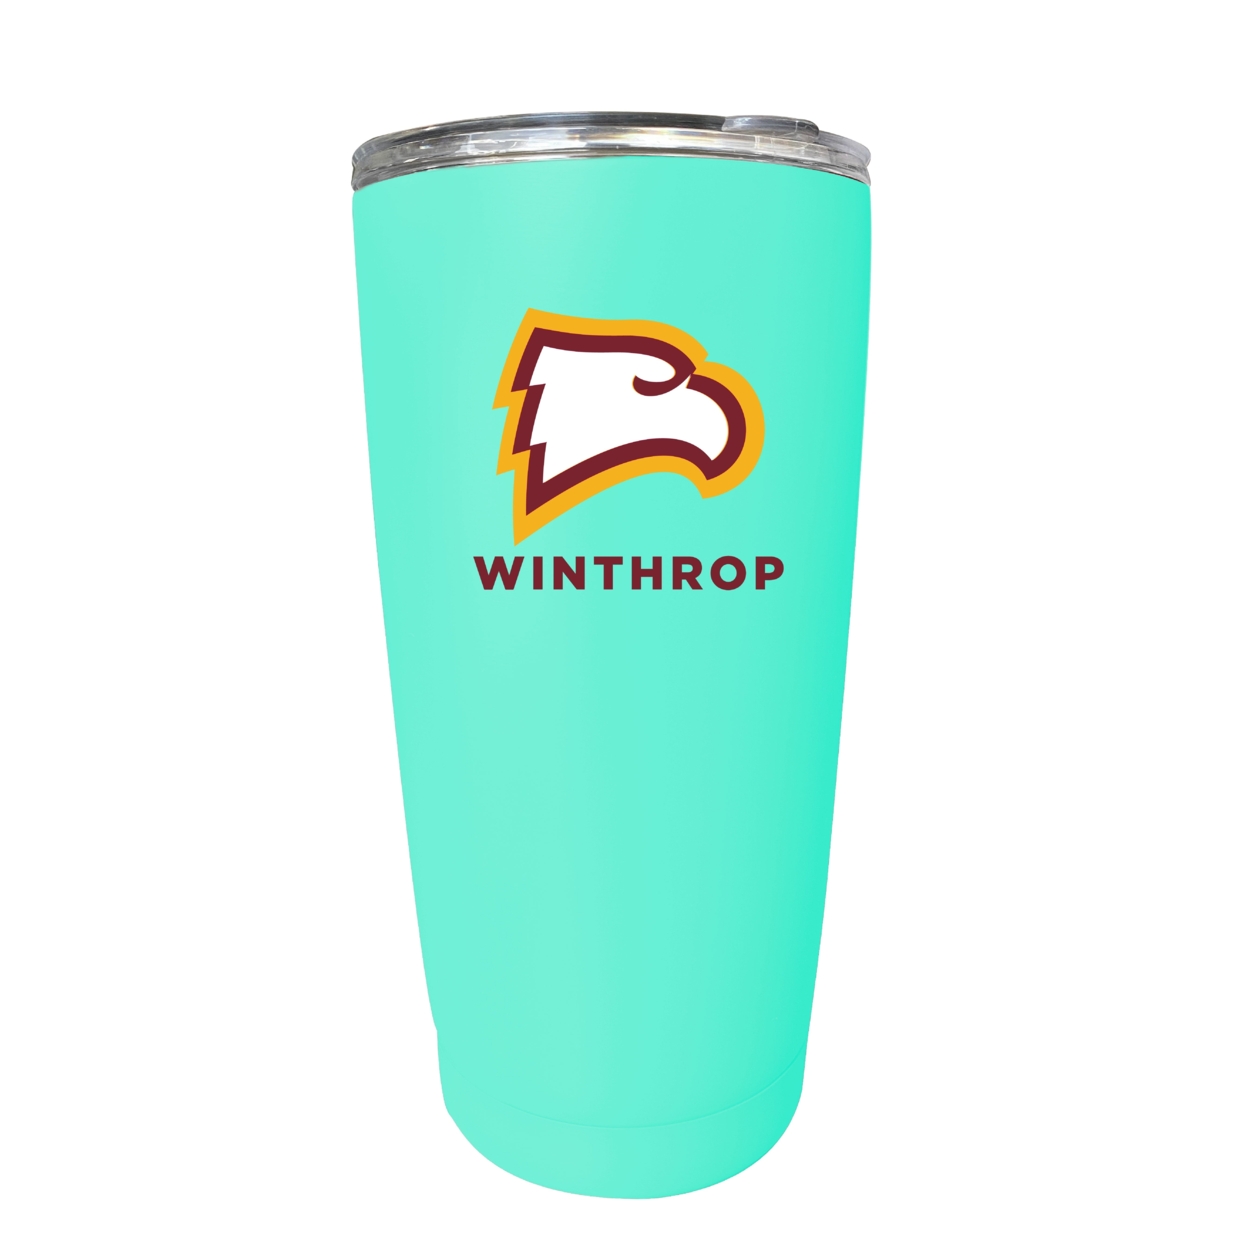 Winthrop University 16 Oz Insulated Stainless Steel Tumblers - Choose Your Color - Seafoam